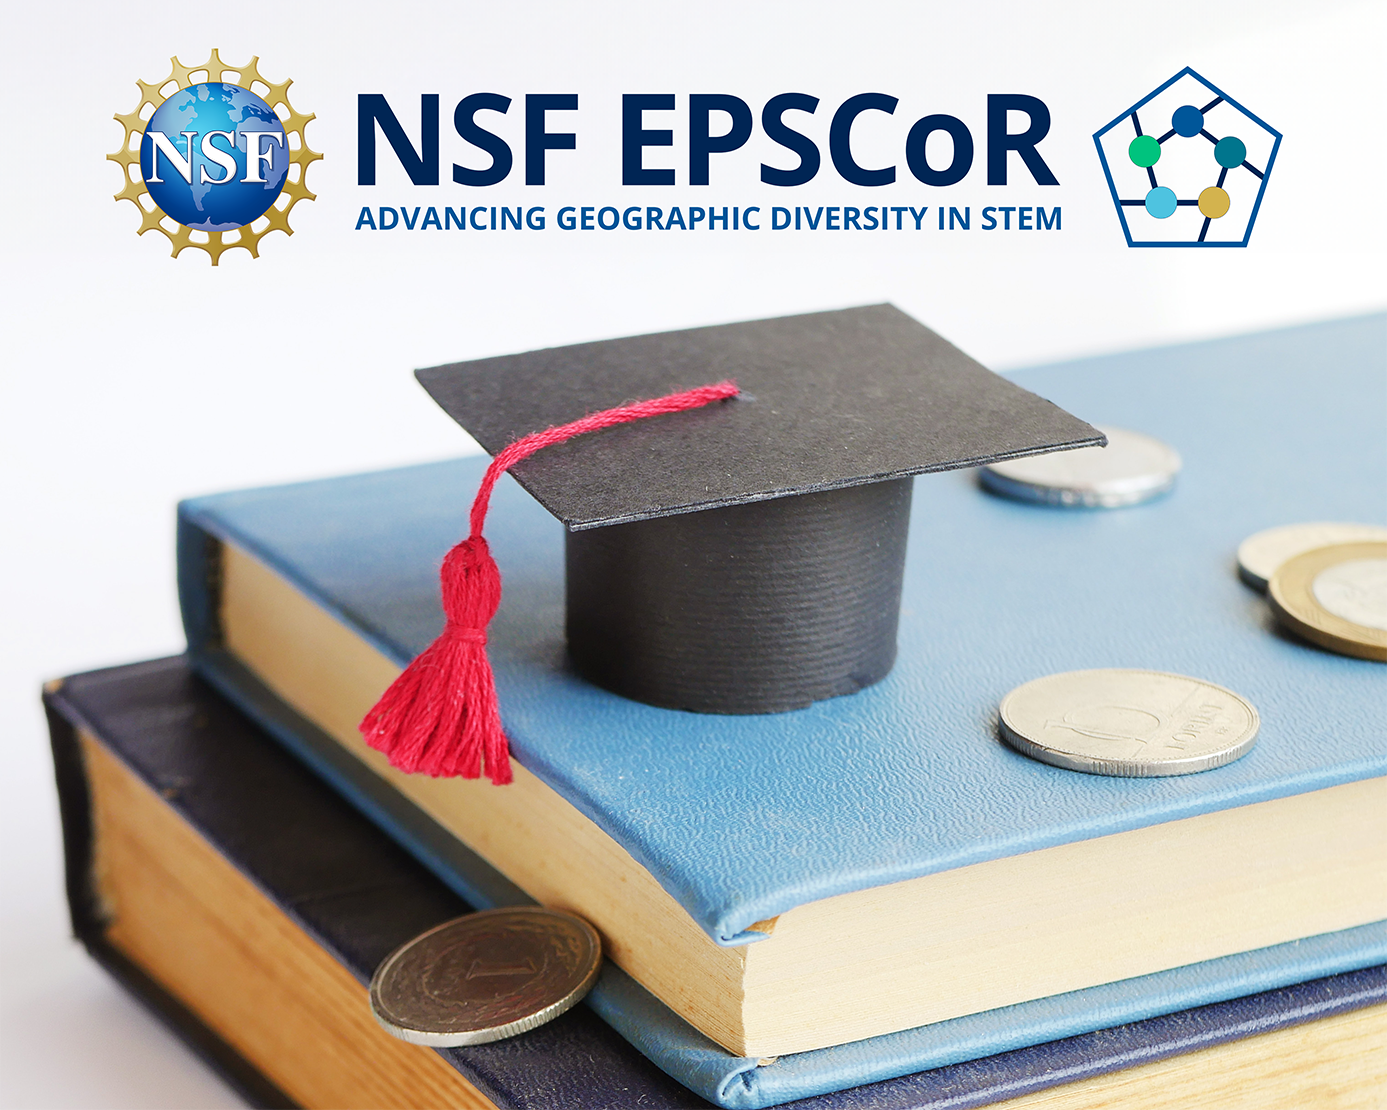 NSF EPSCoR logo with books in the background